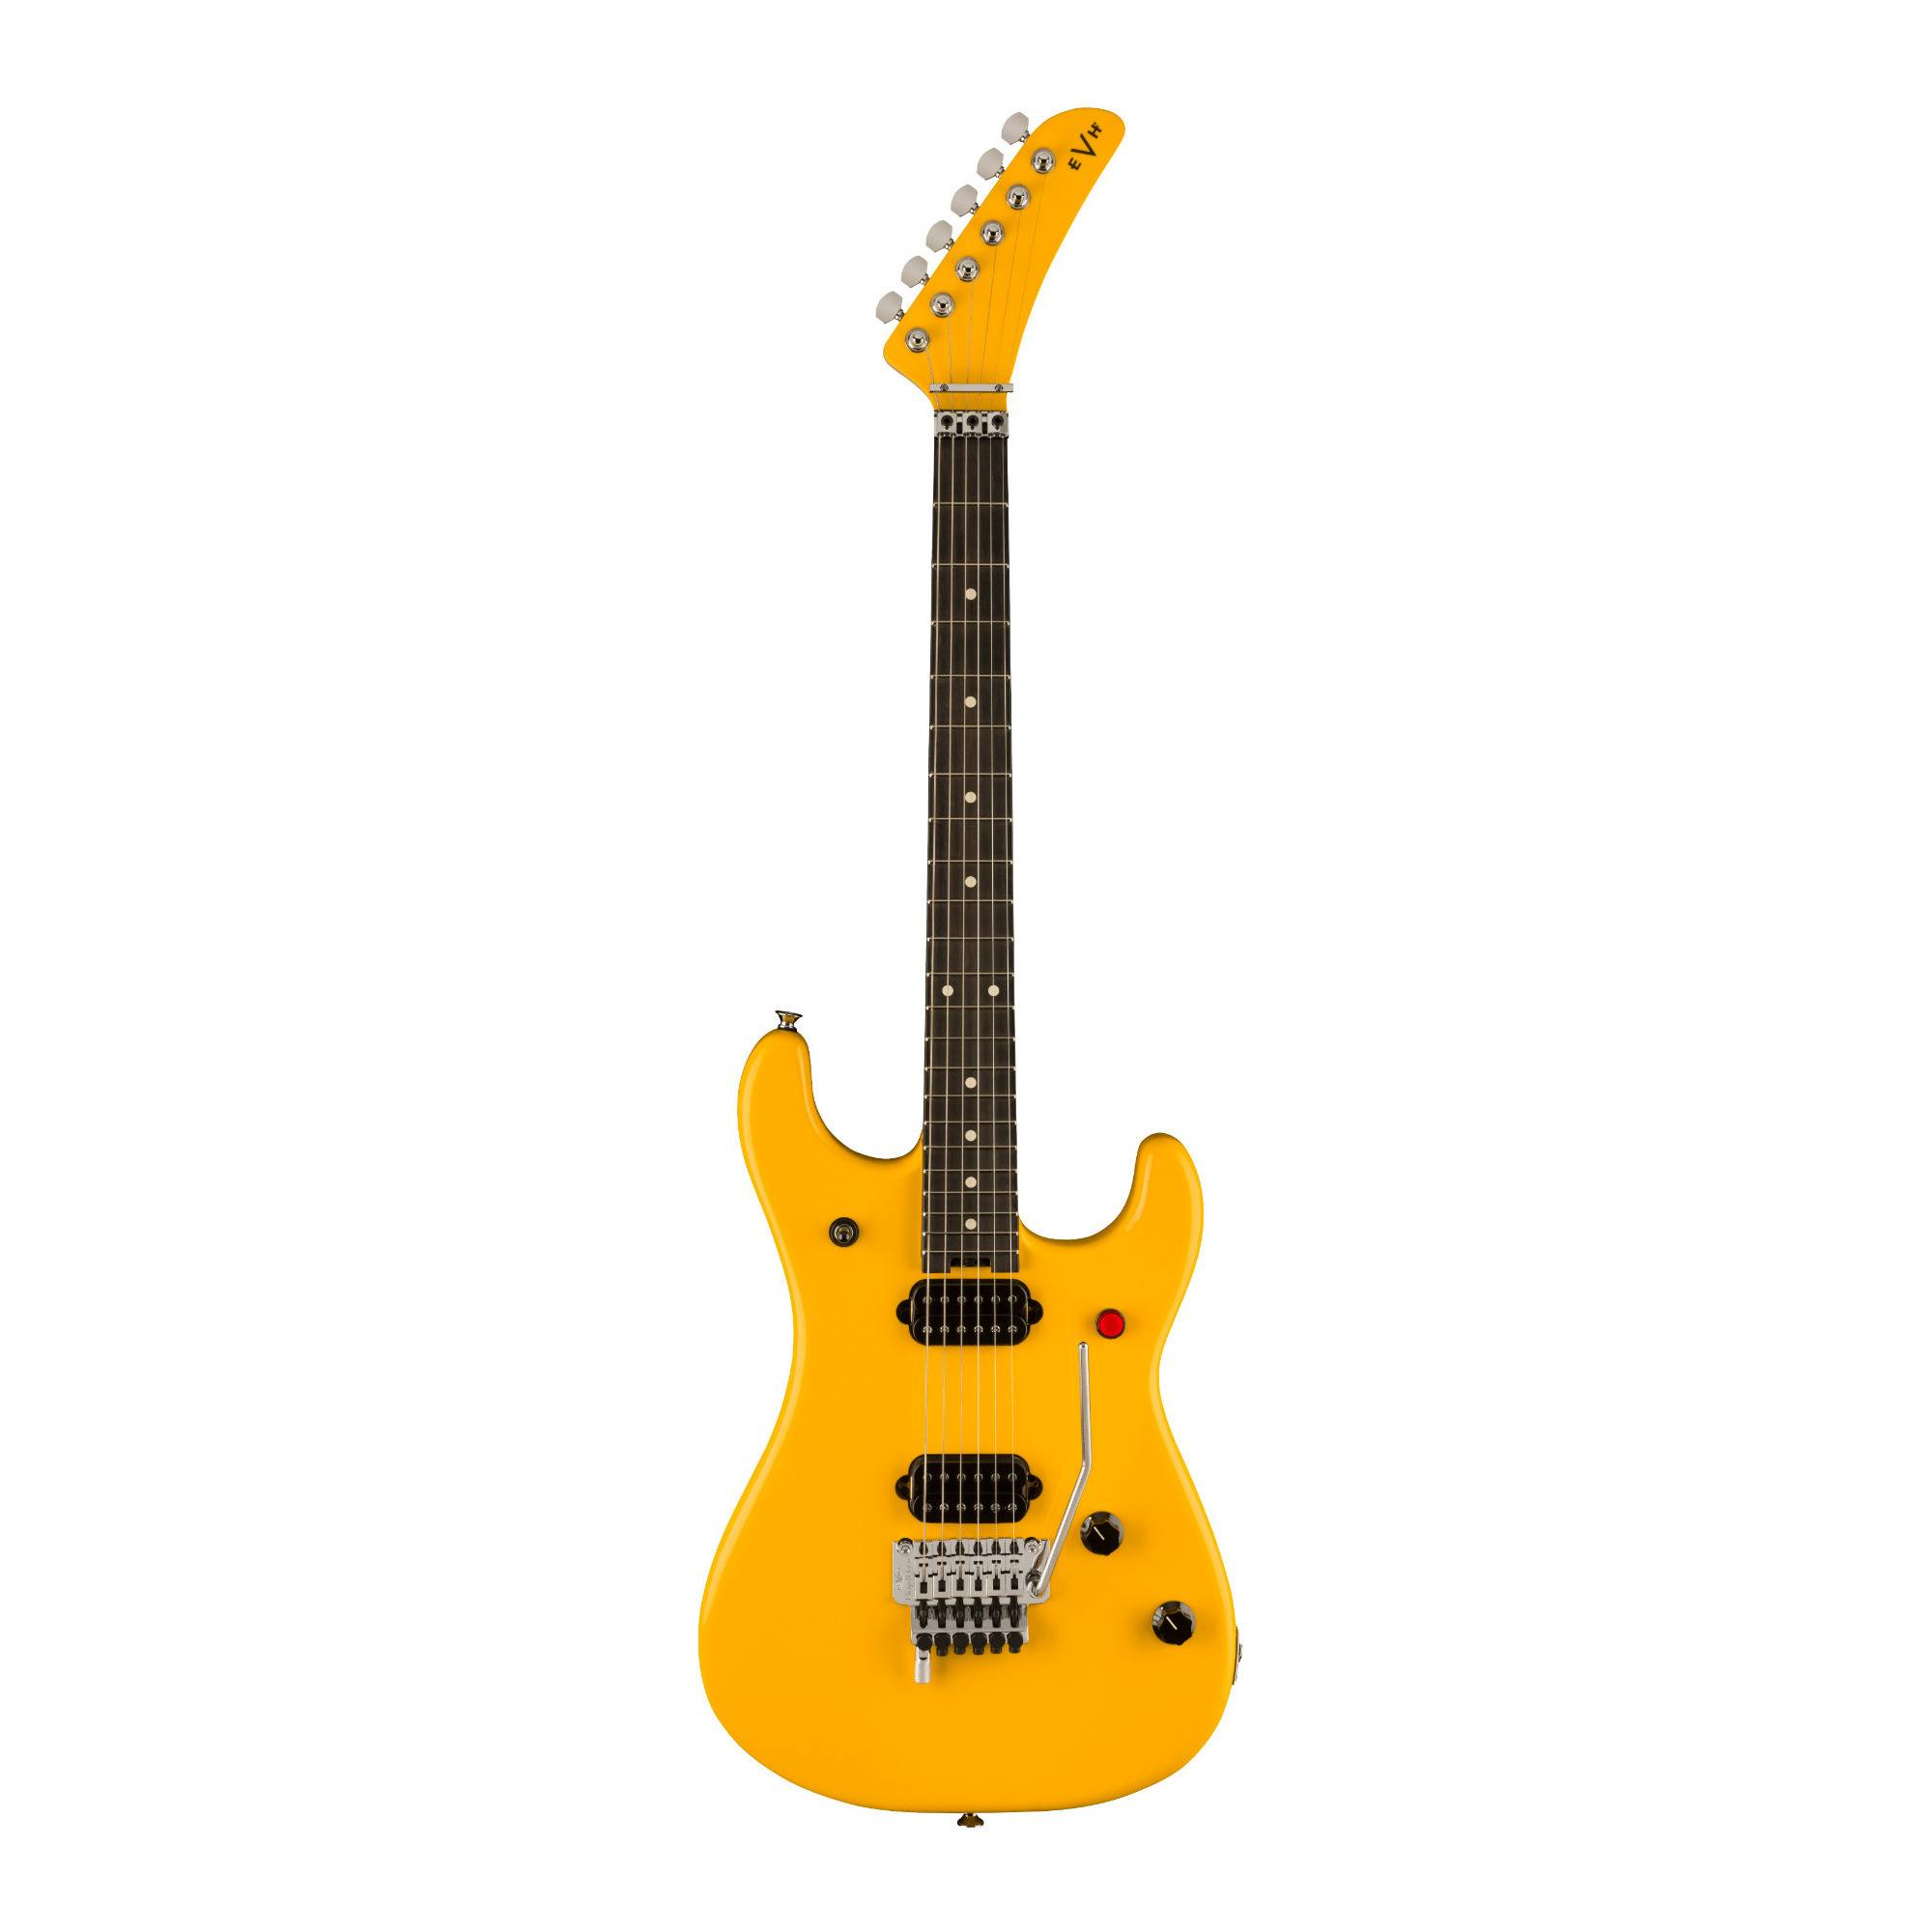 EVH 5150 Series Standard Basswood Body 6-String Electric Guitar (Right-Handed, EVH Yellow)